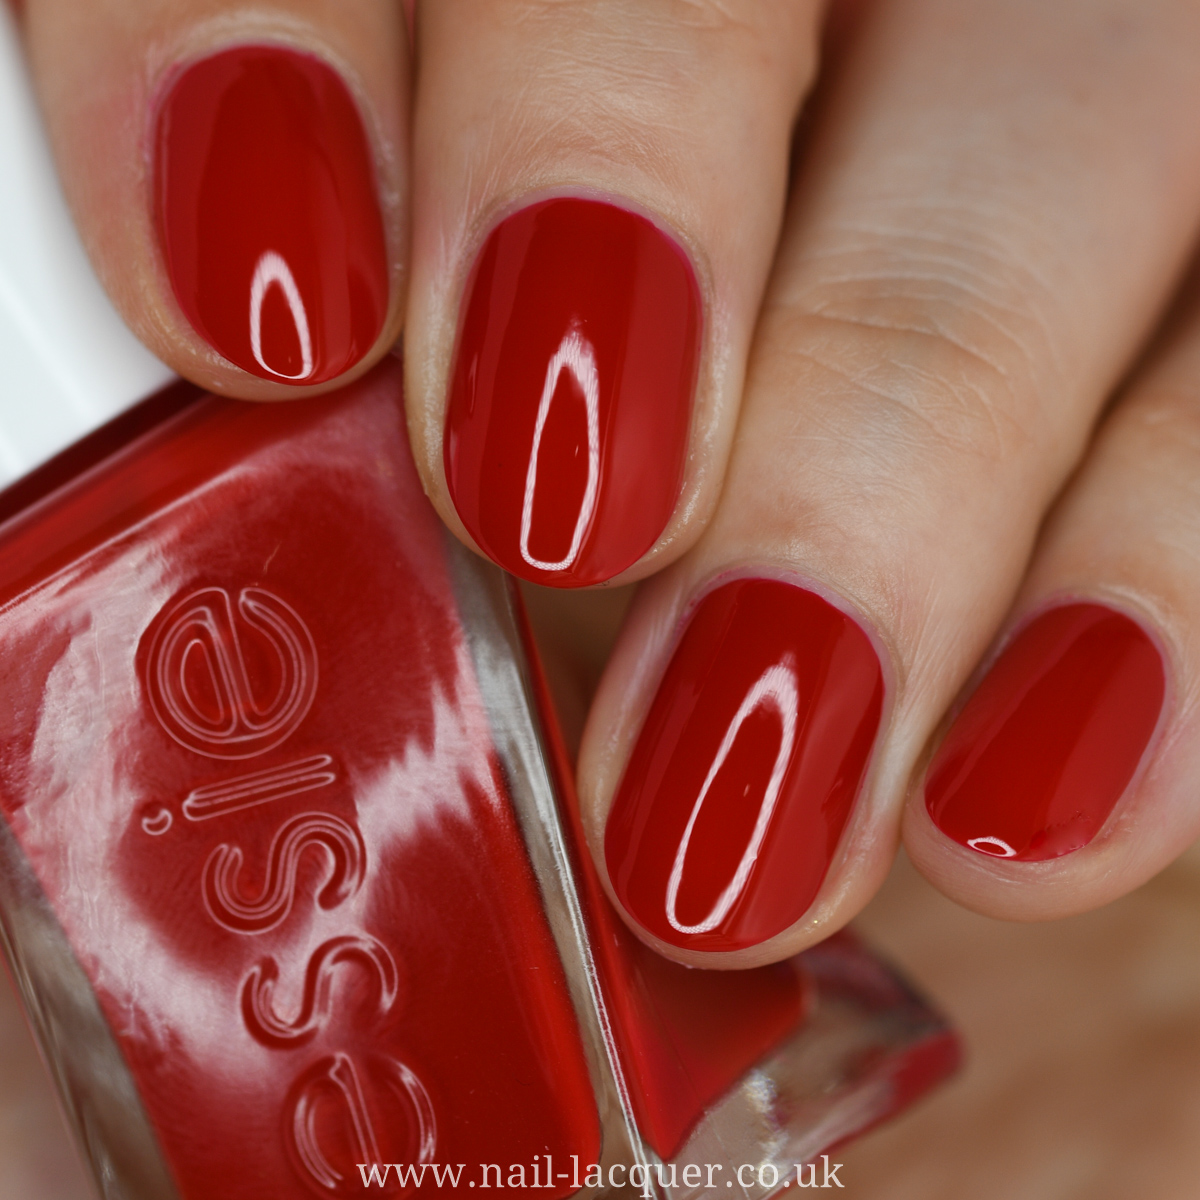 Essie Gel Couture collection review and swatches by Nail Lacquer UK